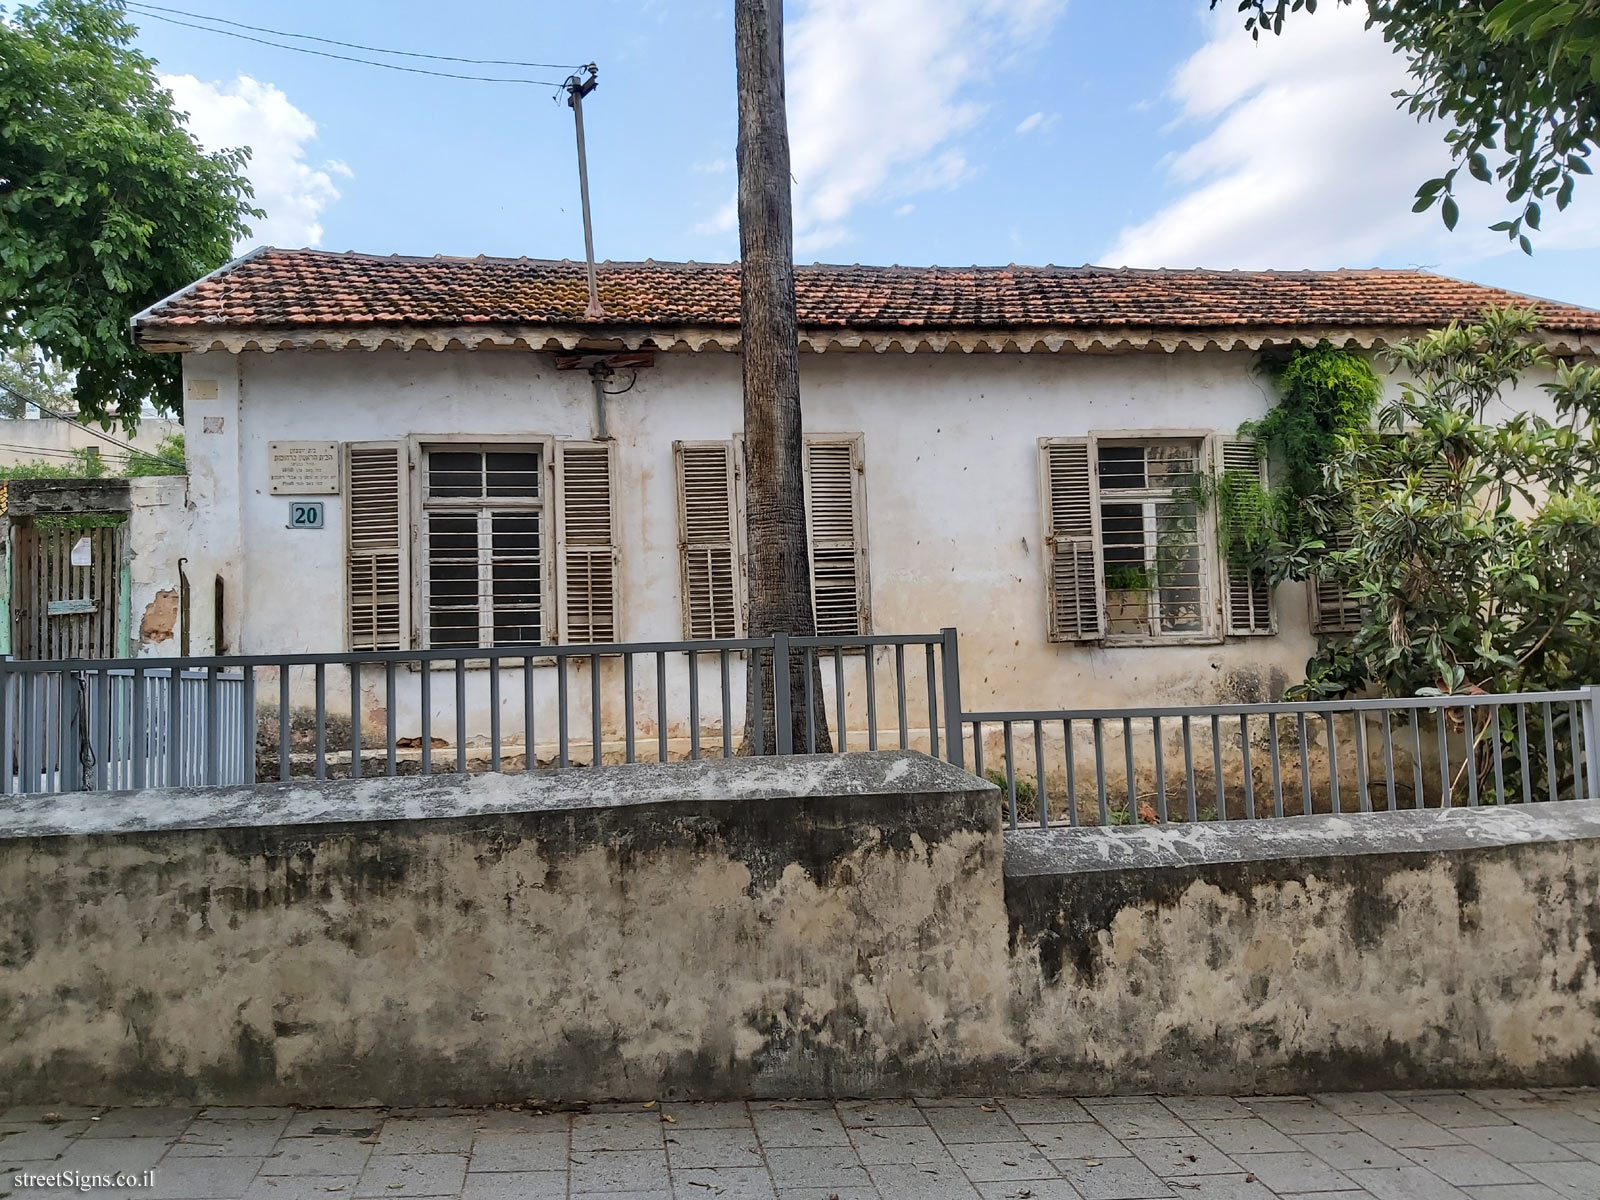 Beit Yosefzon - The first house in Rehovot - Ya’akov St 20, Rehovot, Israel